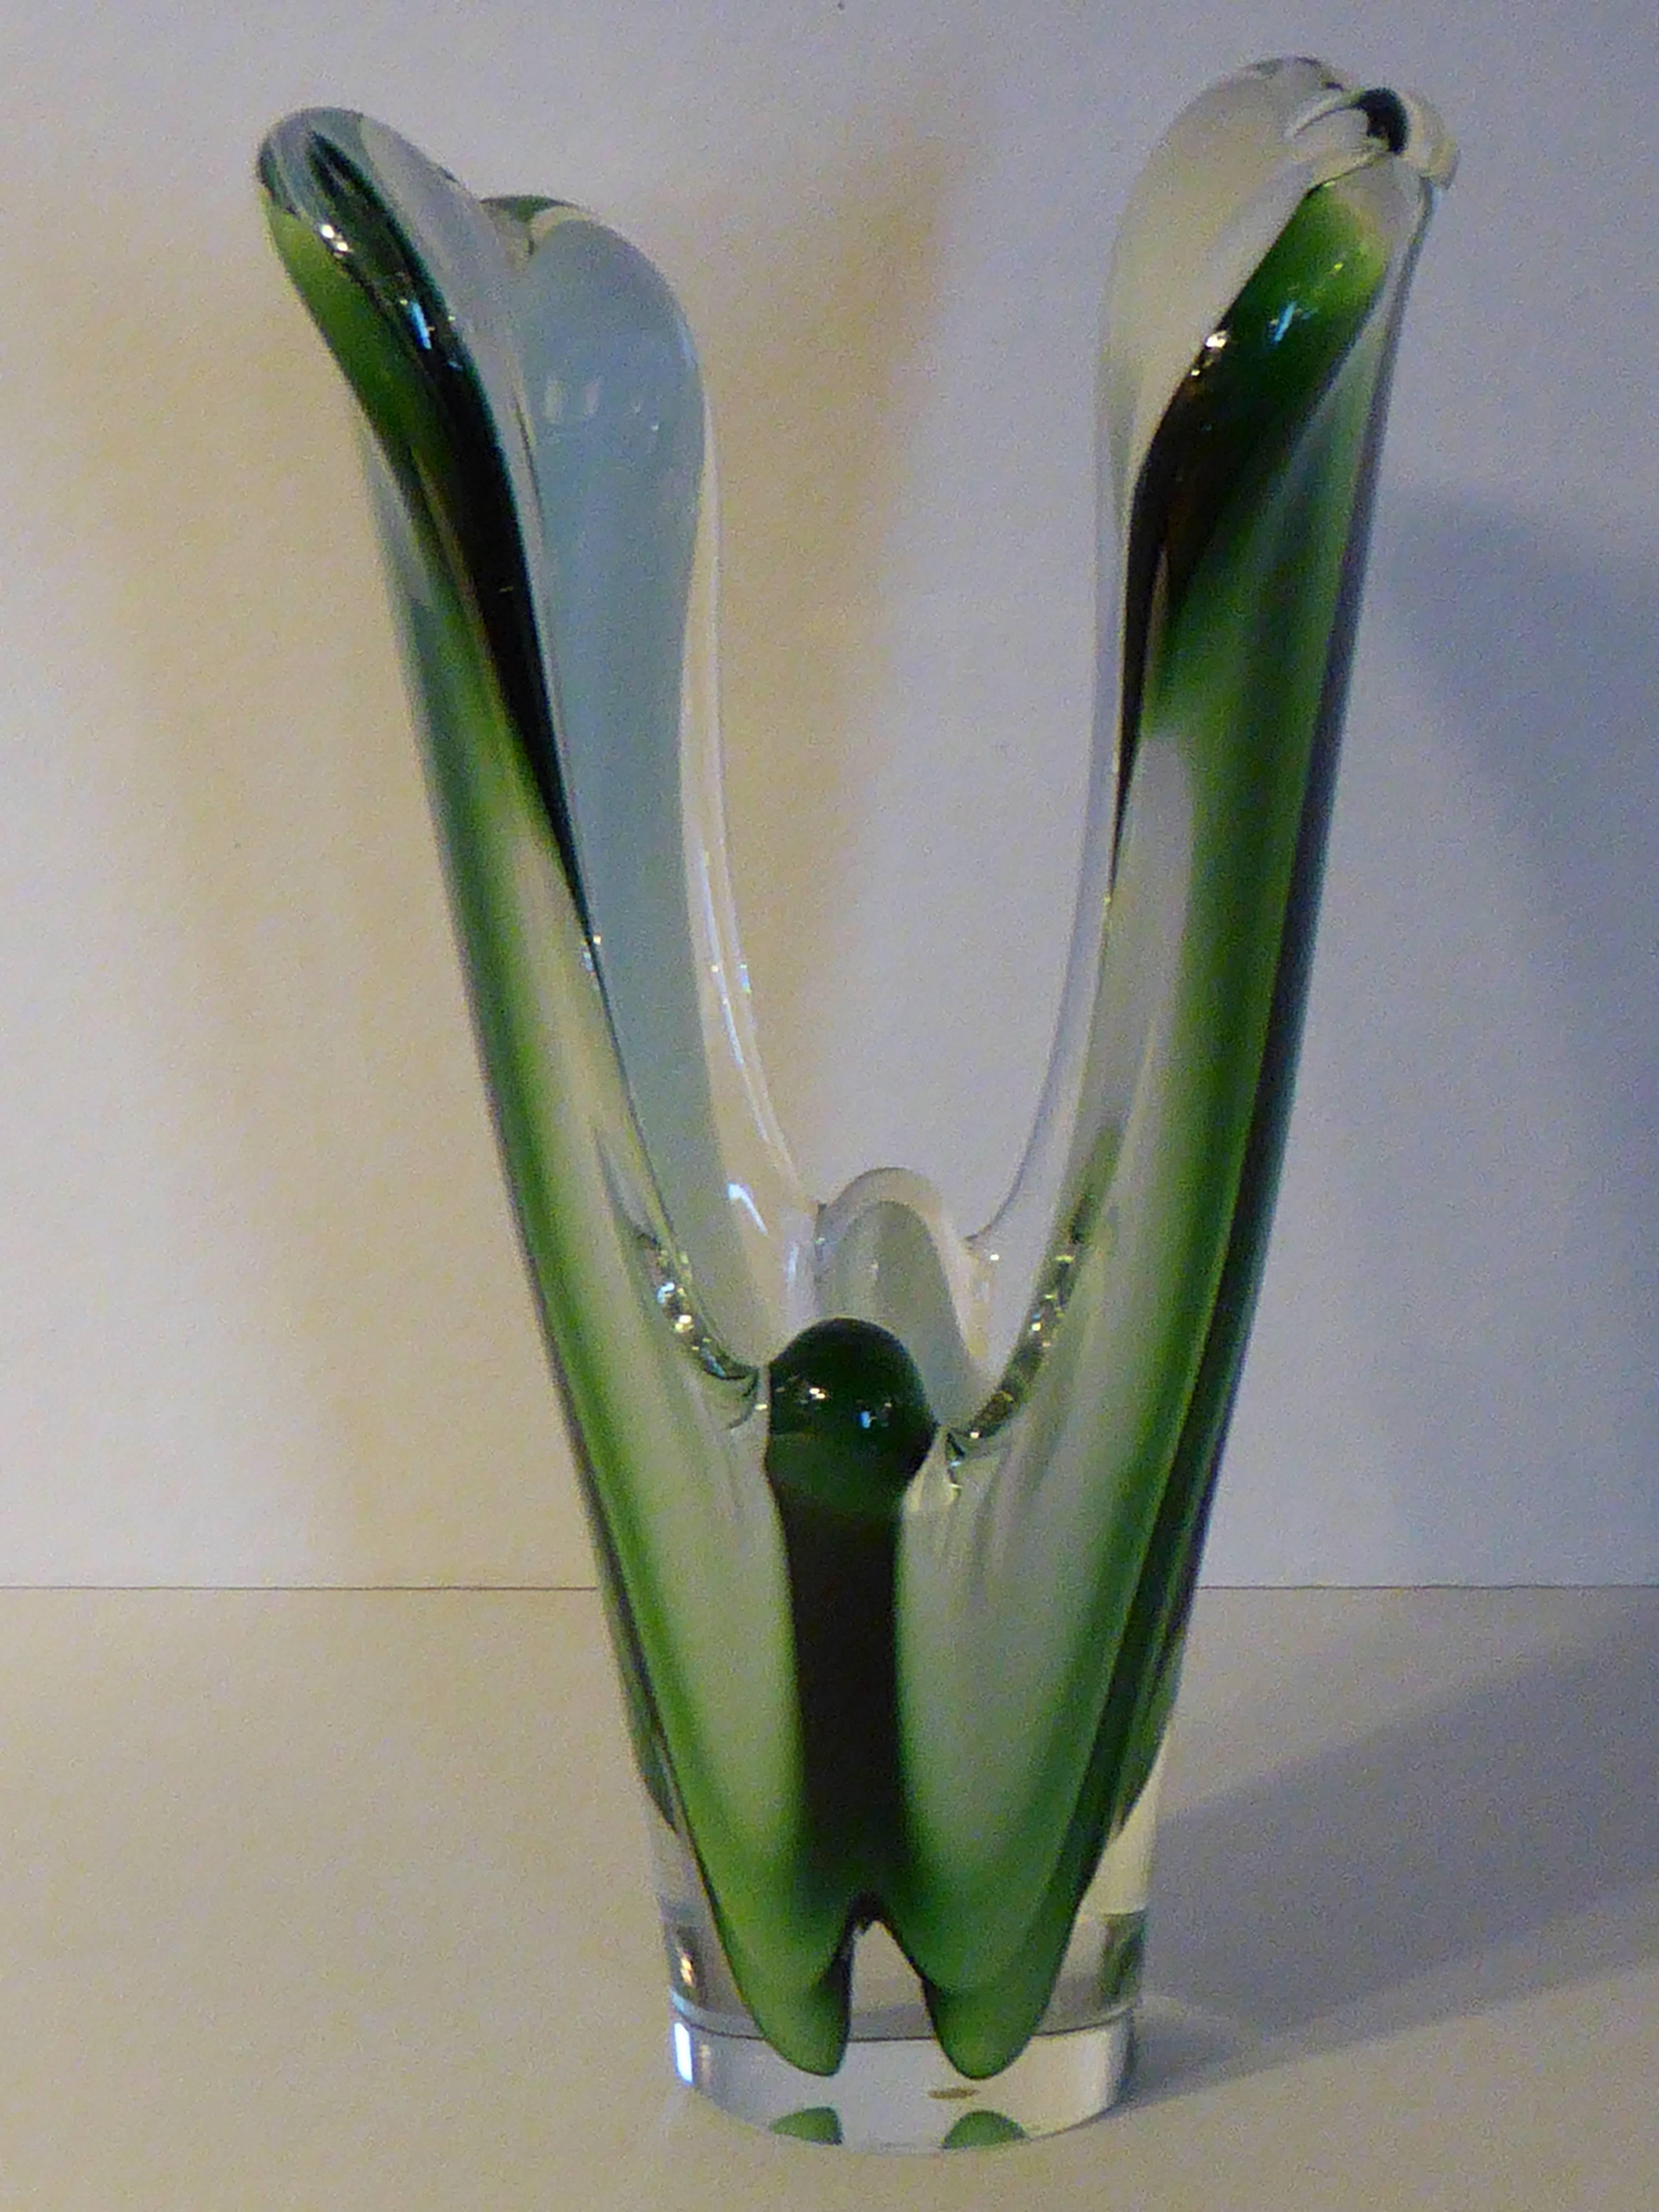 A stunning large Scandinavian free-form glass sculpture or vase. Green and white glass encased in clear glass. Made by the Swedish firm Flygsfors in 1960 and designed by Paul Kedelv, part of his very organic Coquille line. Signed on the base